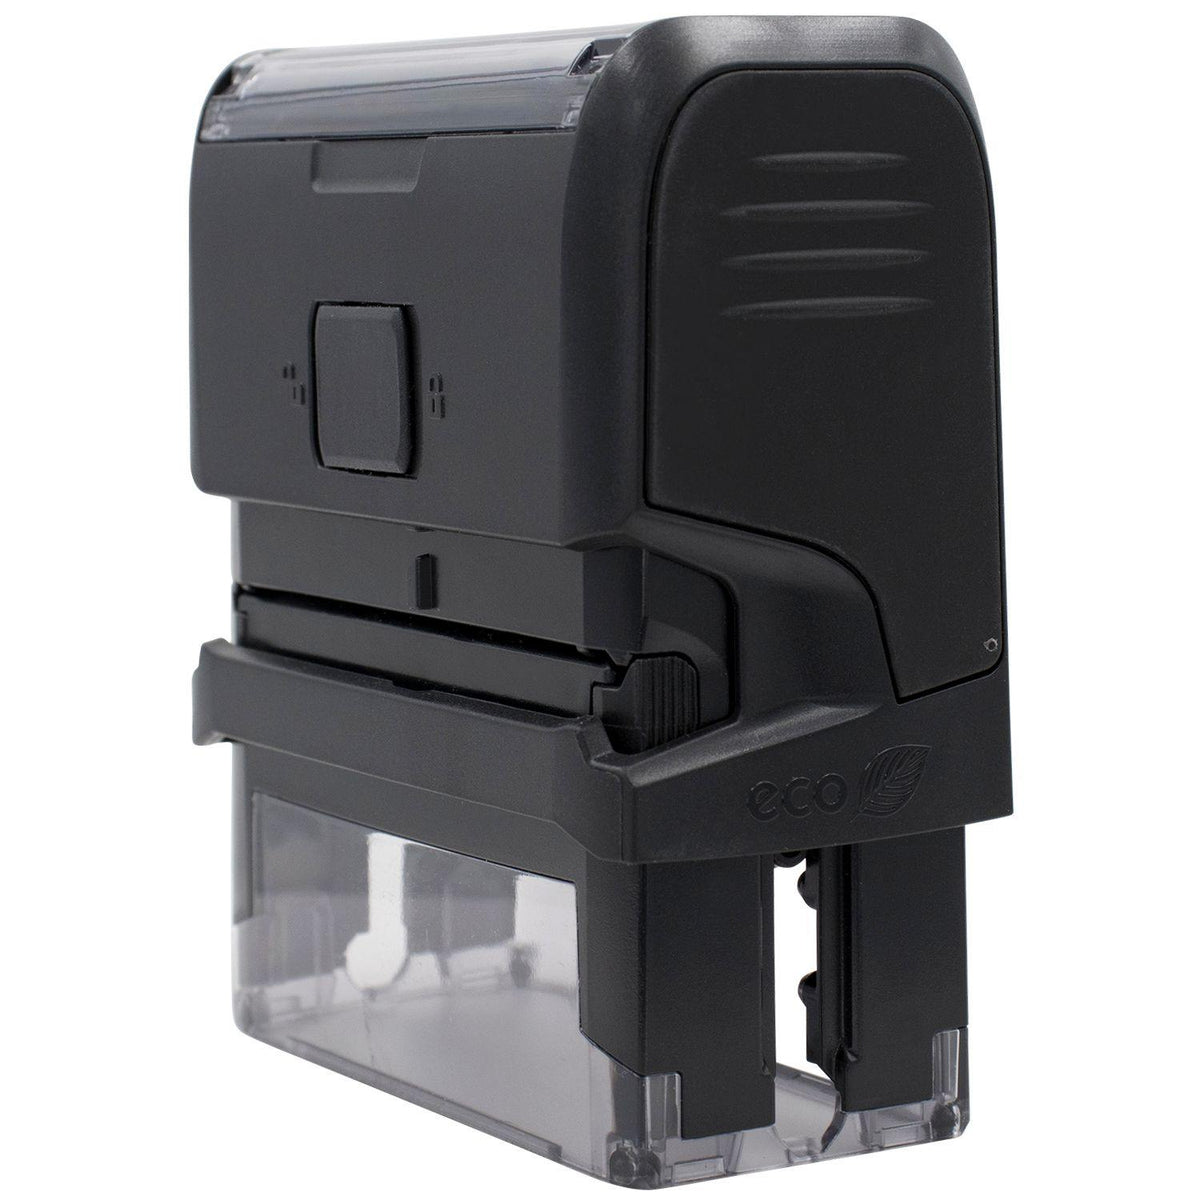 Self Inking Broker Copy Stamp - Engineer Seal Stamps - Brand_Trodat, Impression Size_Small, Stamp Type_Self-Inking Stamp, Type of Use_Finance